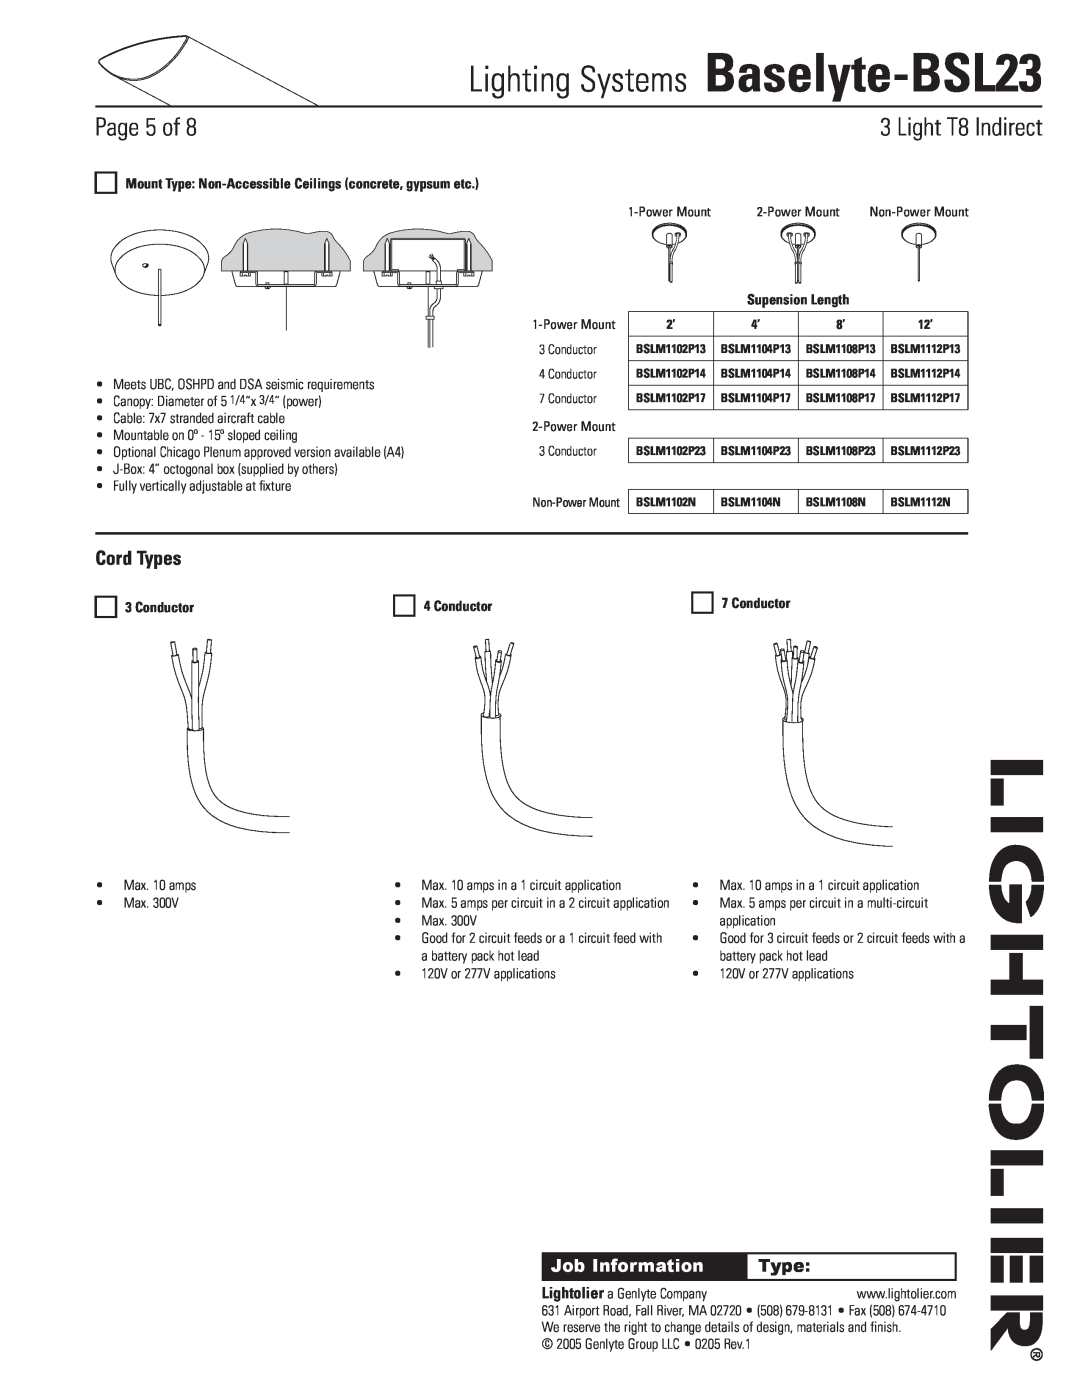 Lightolier Cord Types, Conductor, Lighting Systems Baselyte-BSL23, Page of, Light T8 Indirect, Job Information 